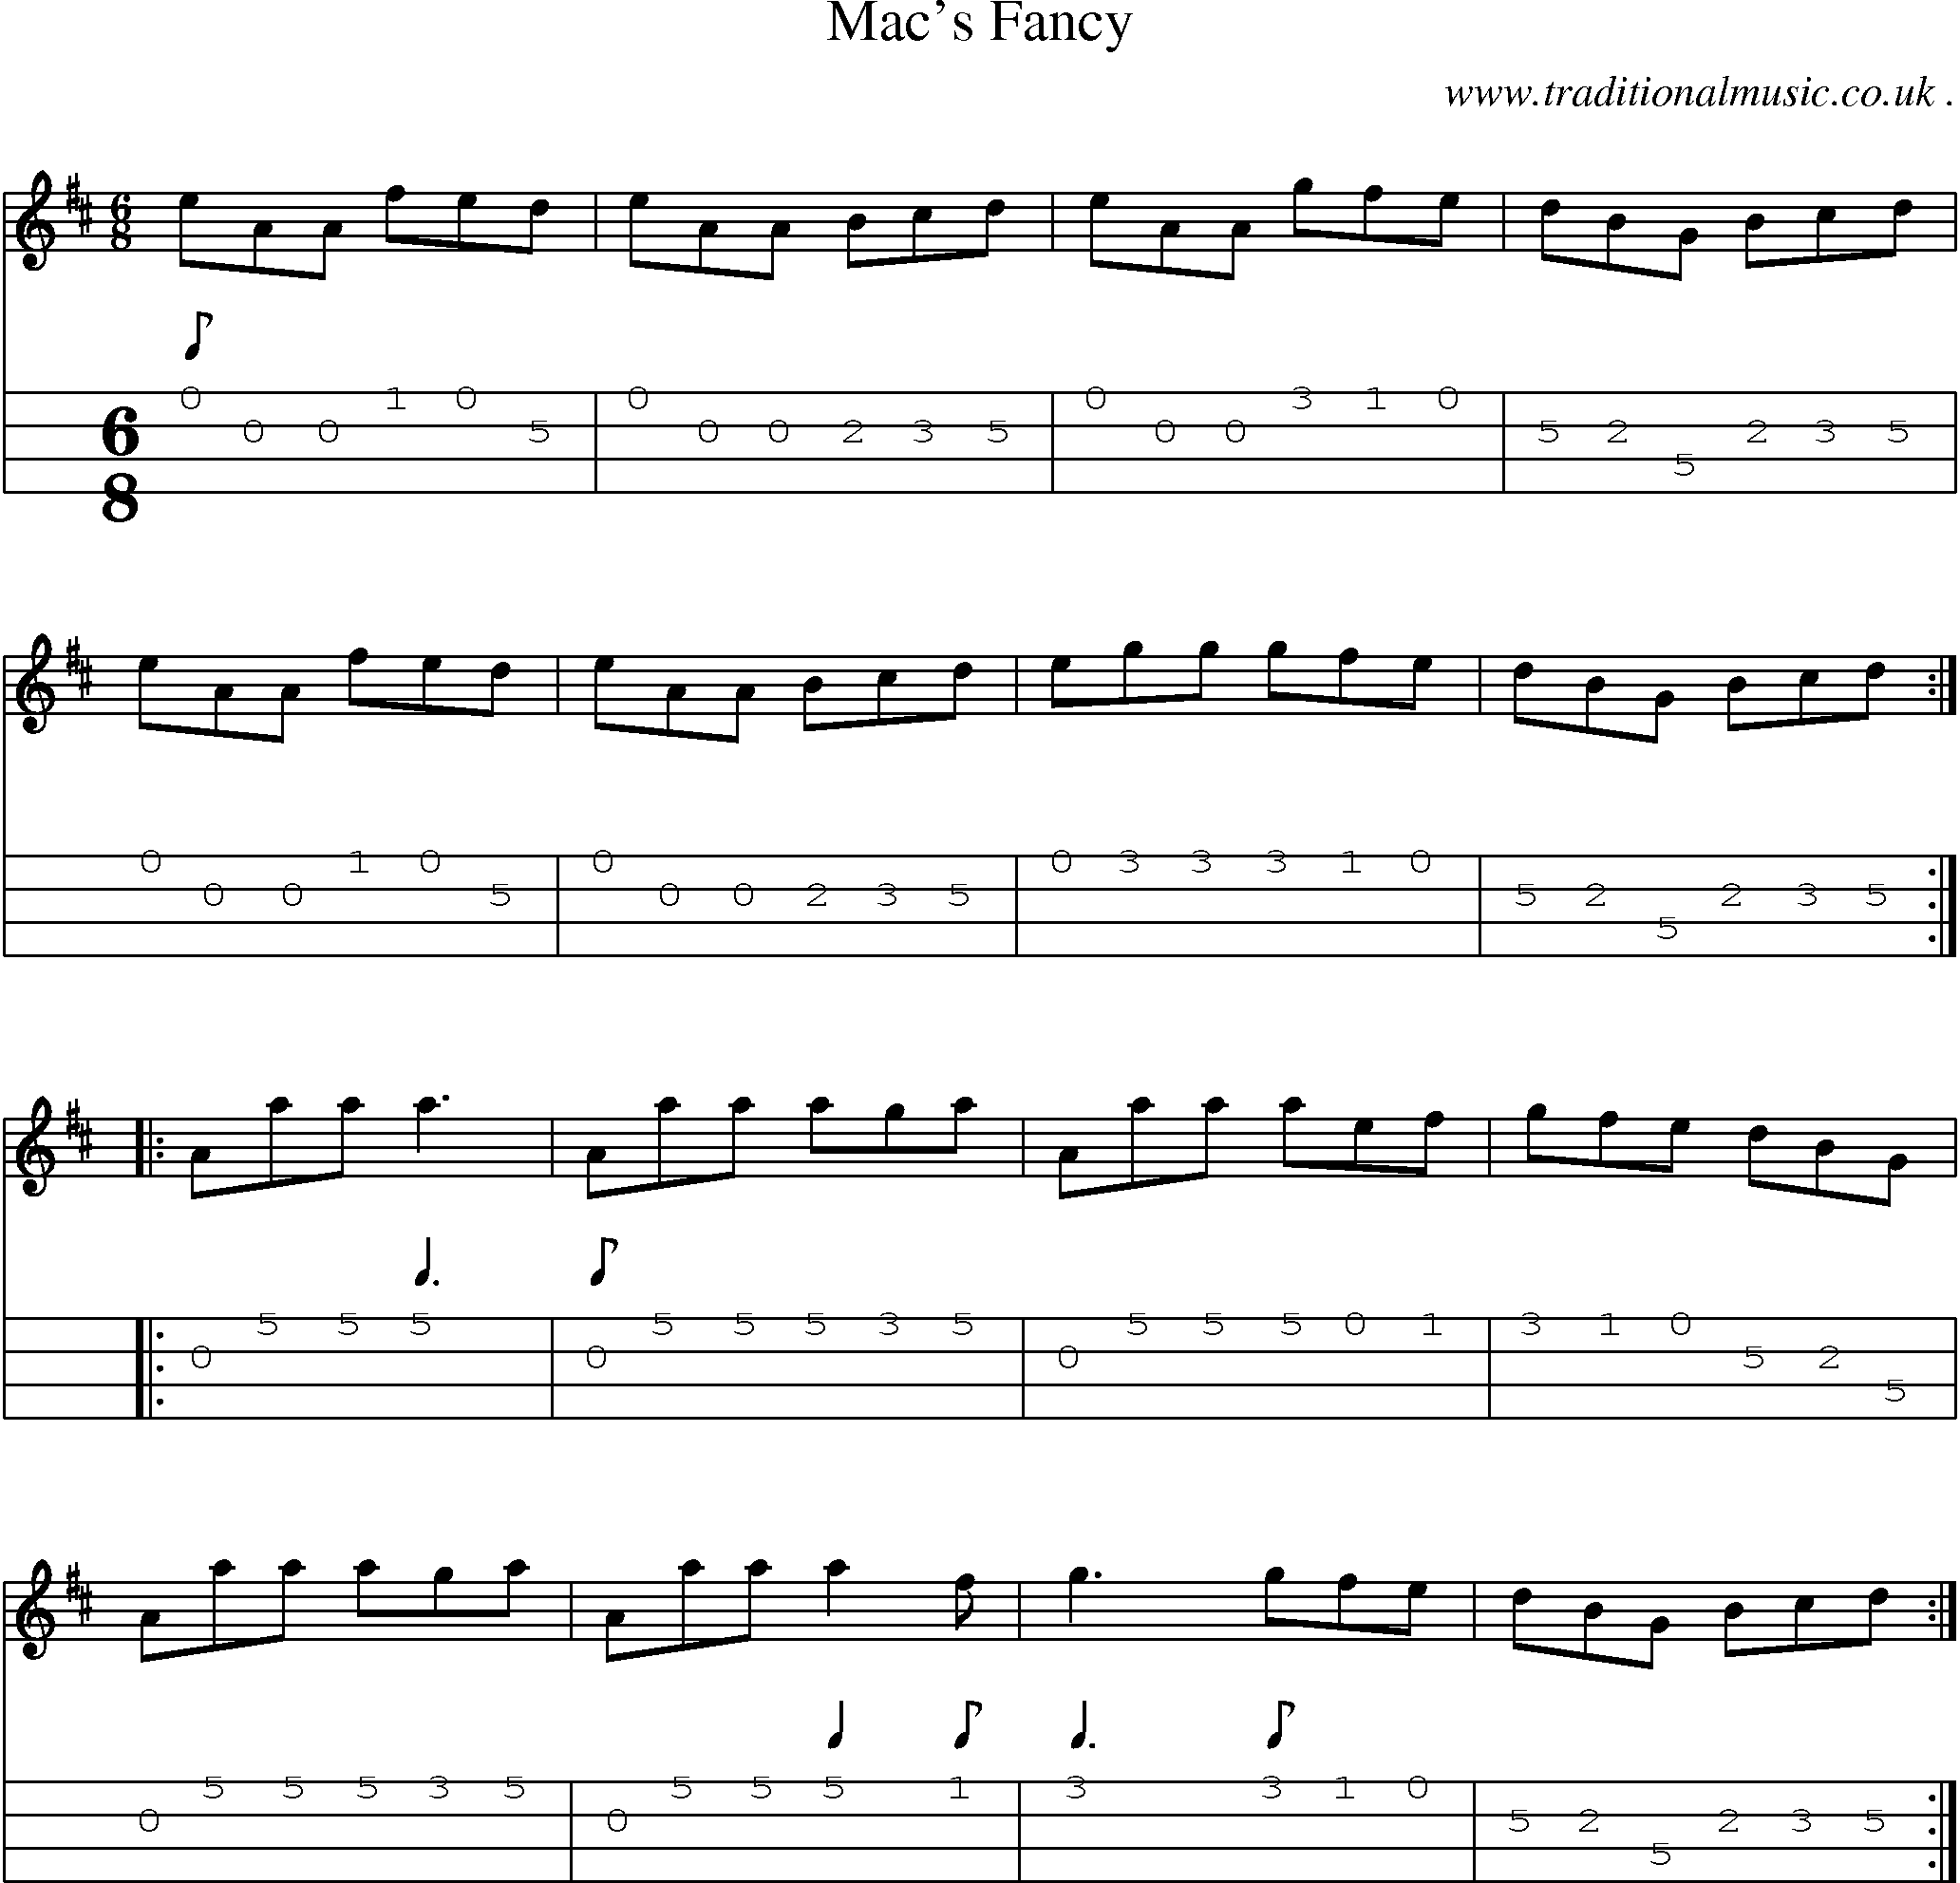 Sheet-Music and Mandolin Tabs for Macs Fancy